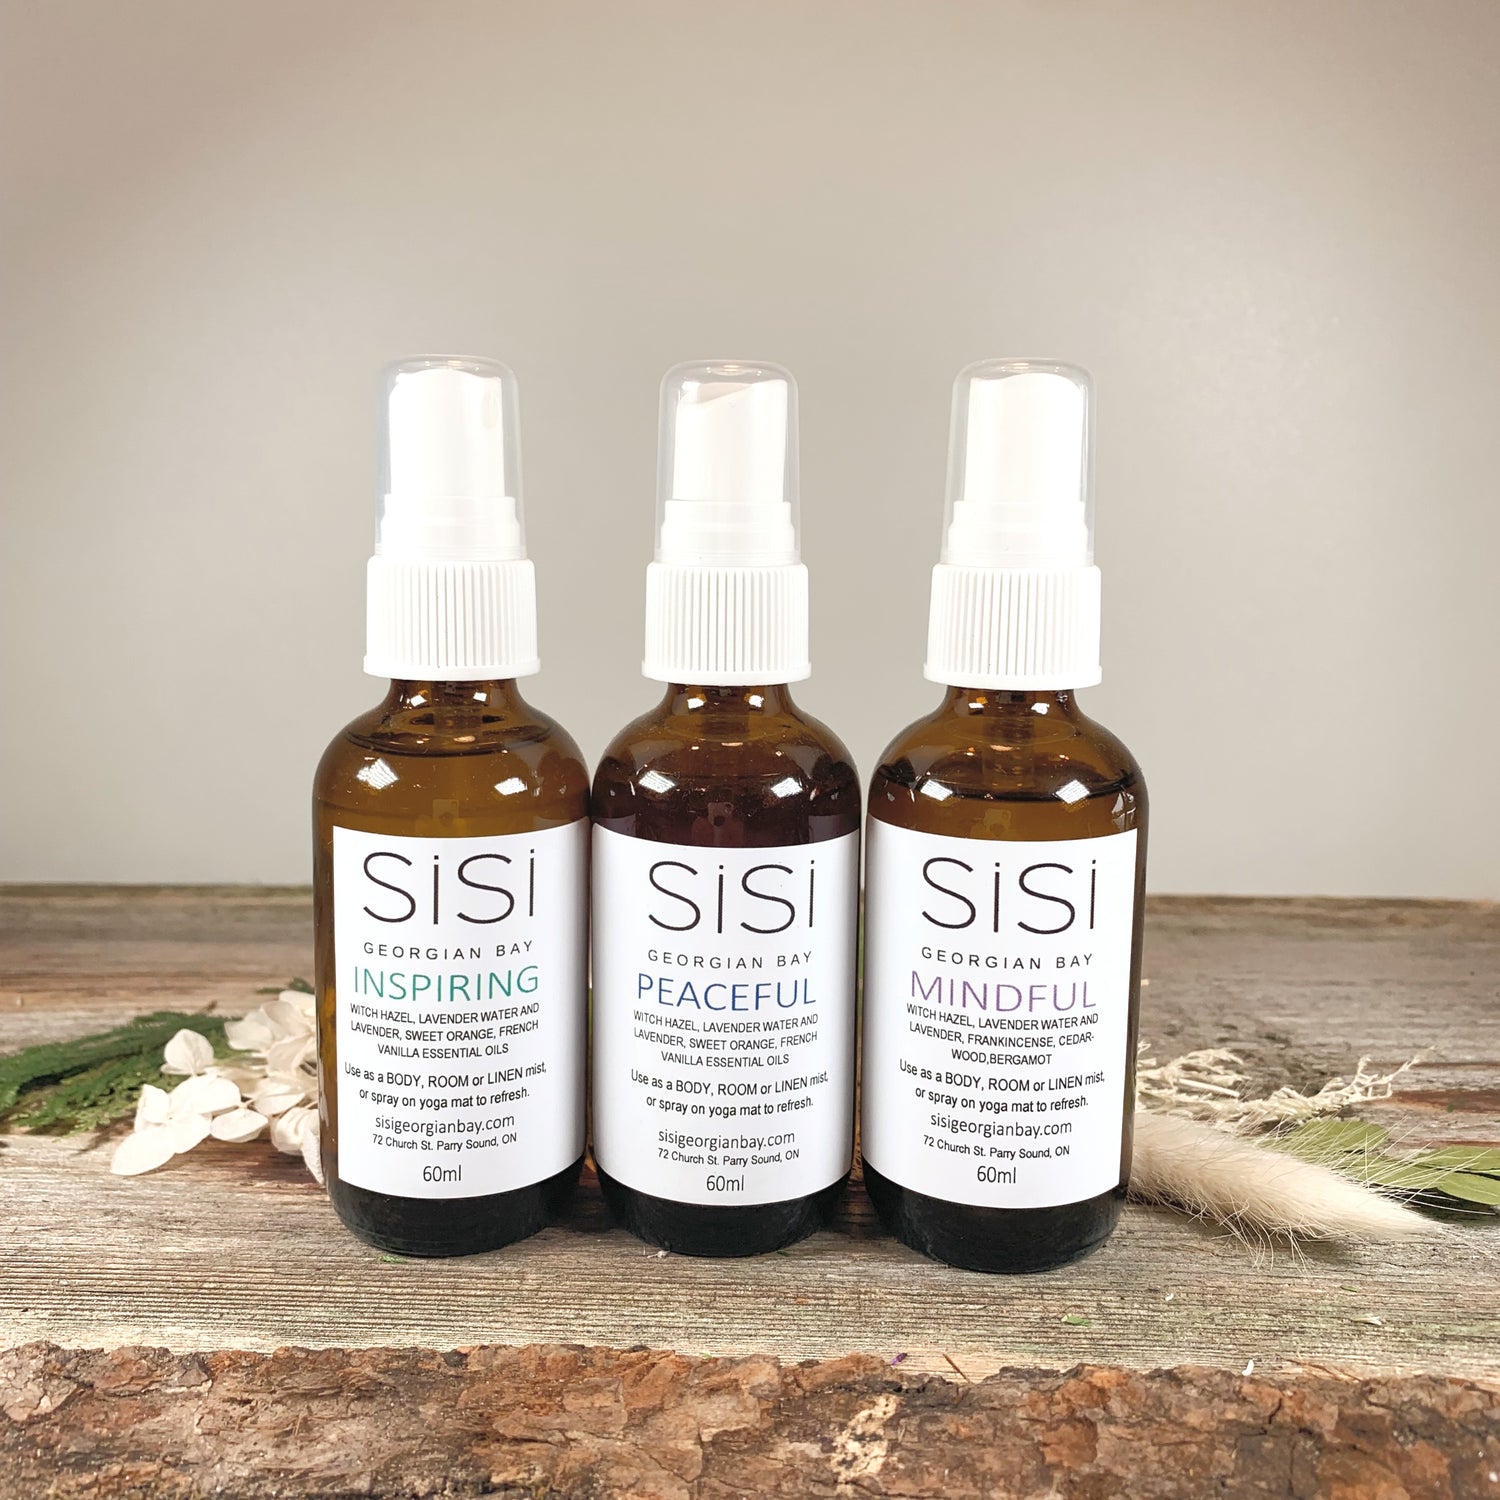 Natural skincare products - Aromatherapy Products - SiSi Georgian Bay Yoga Sprays in amber glass bottles  on a rustic wooden live edge surface with flowers and greenery spread around the bottom